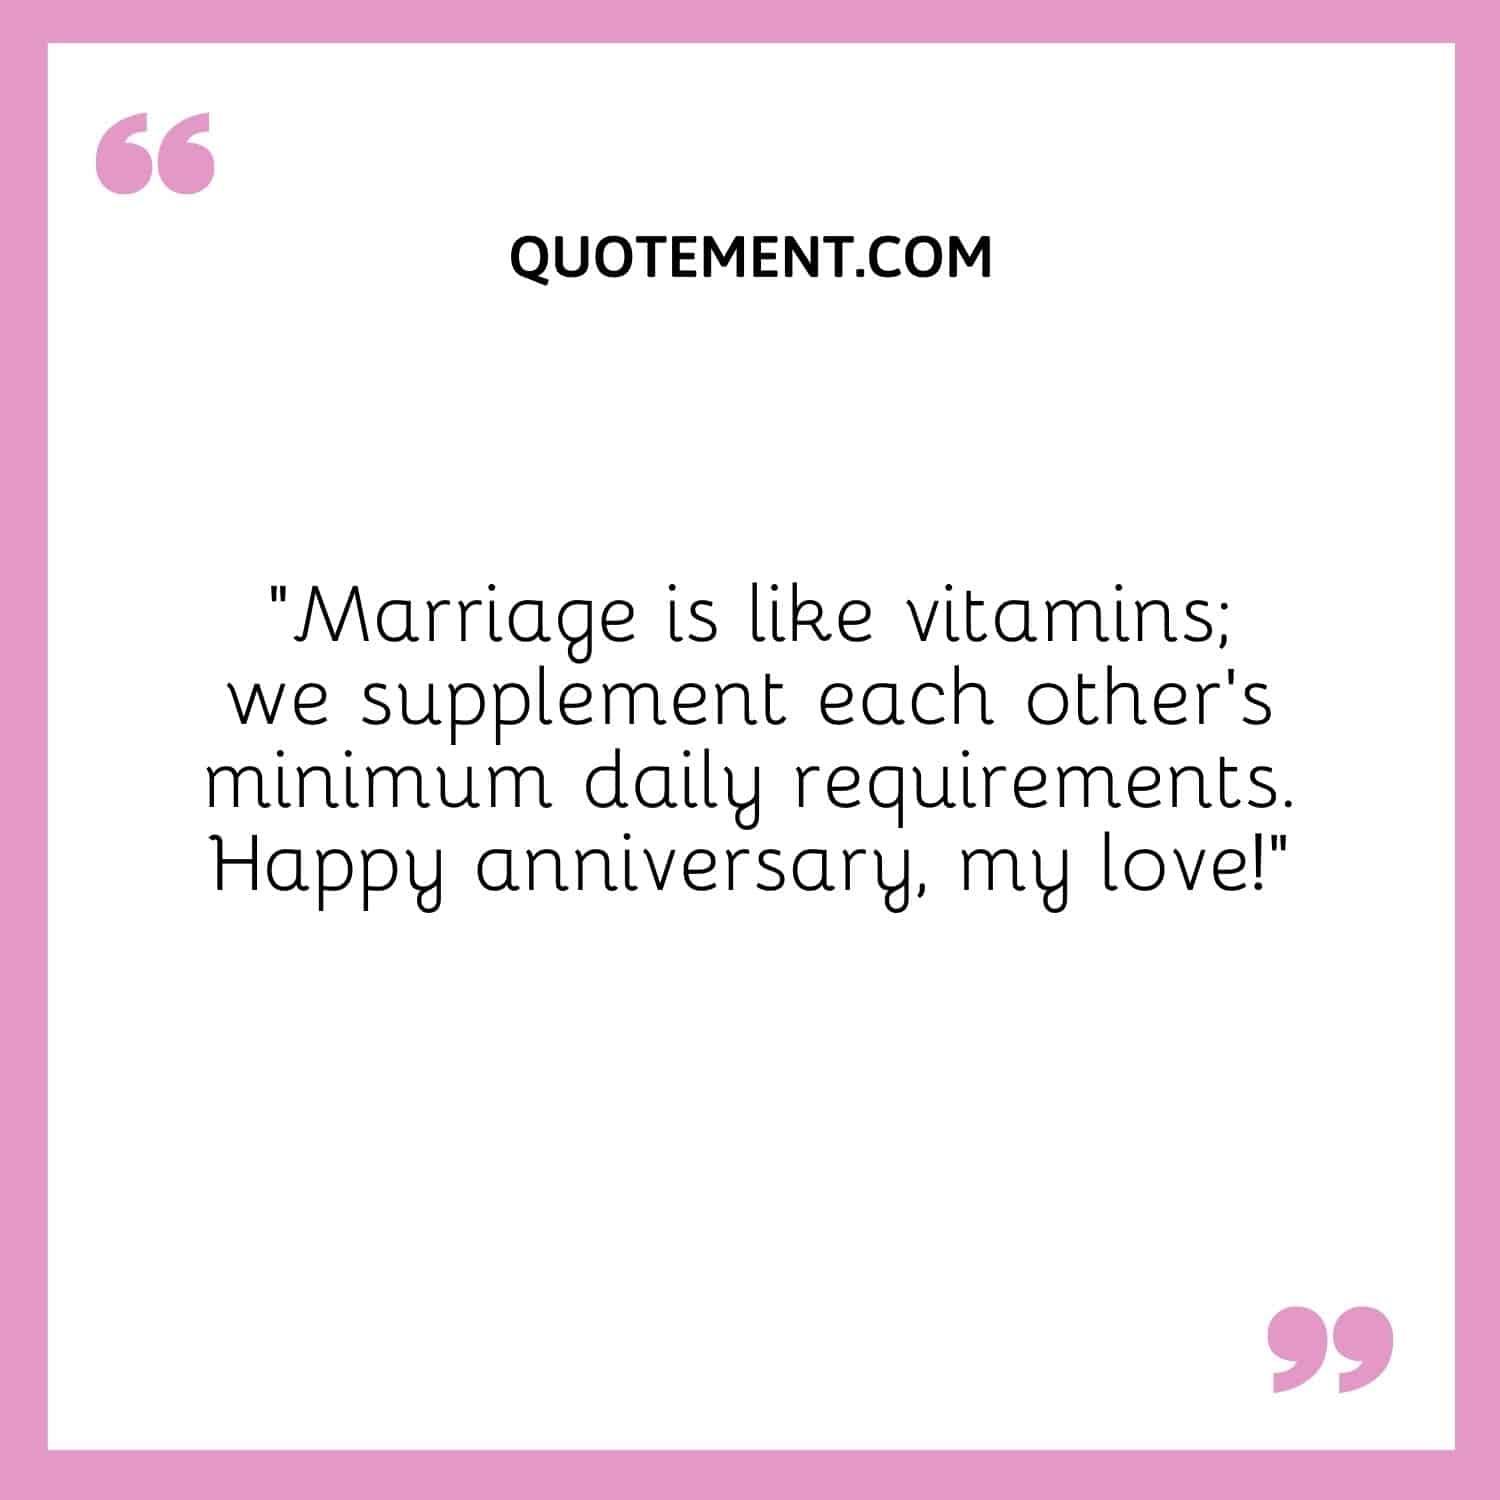 “Marriage is like vitamins; we supplement each other’s minimum daily requirements. Happy anniversary, my love!”